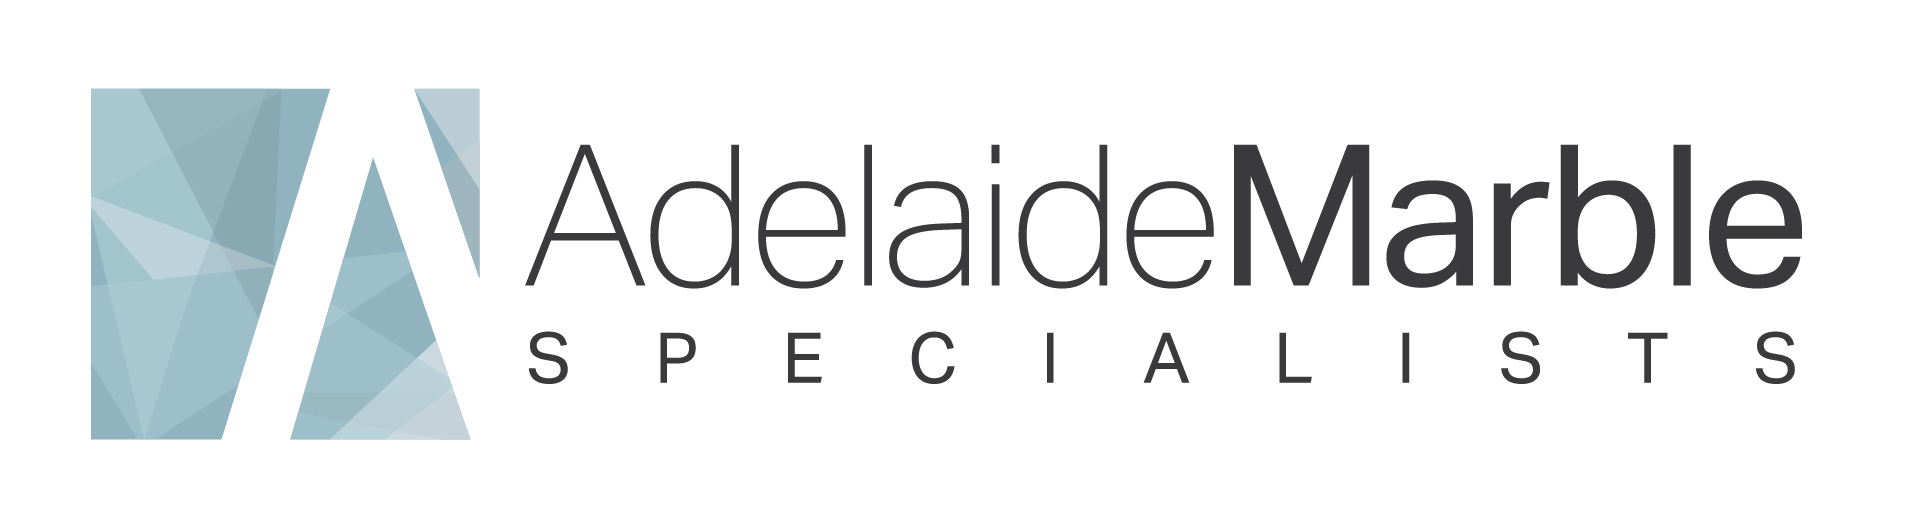 Adelaide Marble Specialists icon